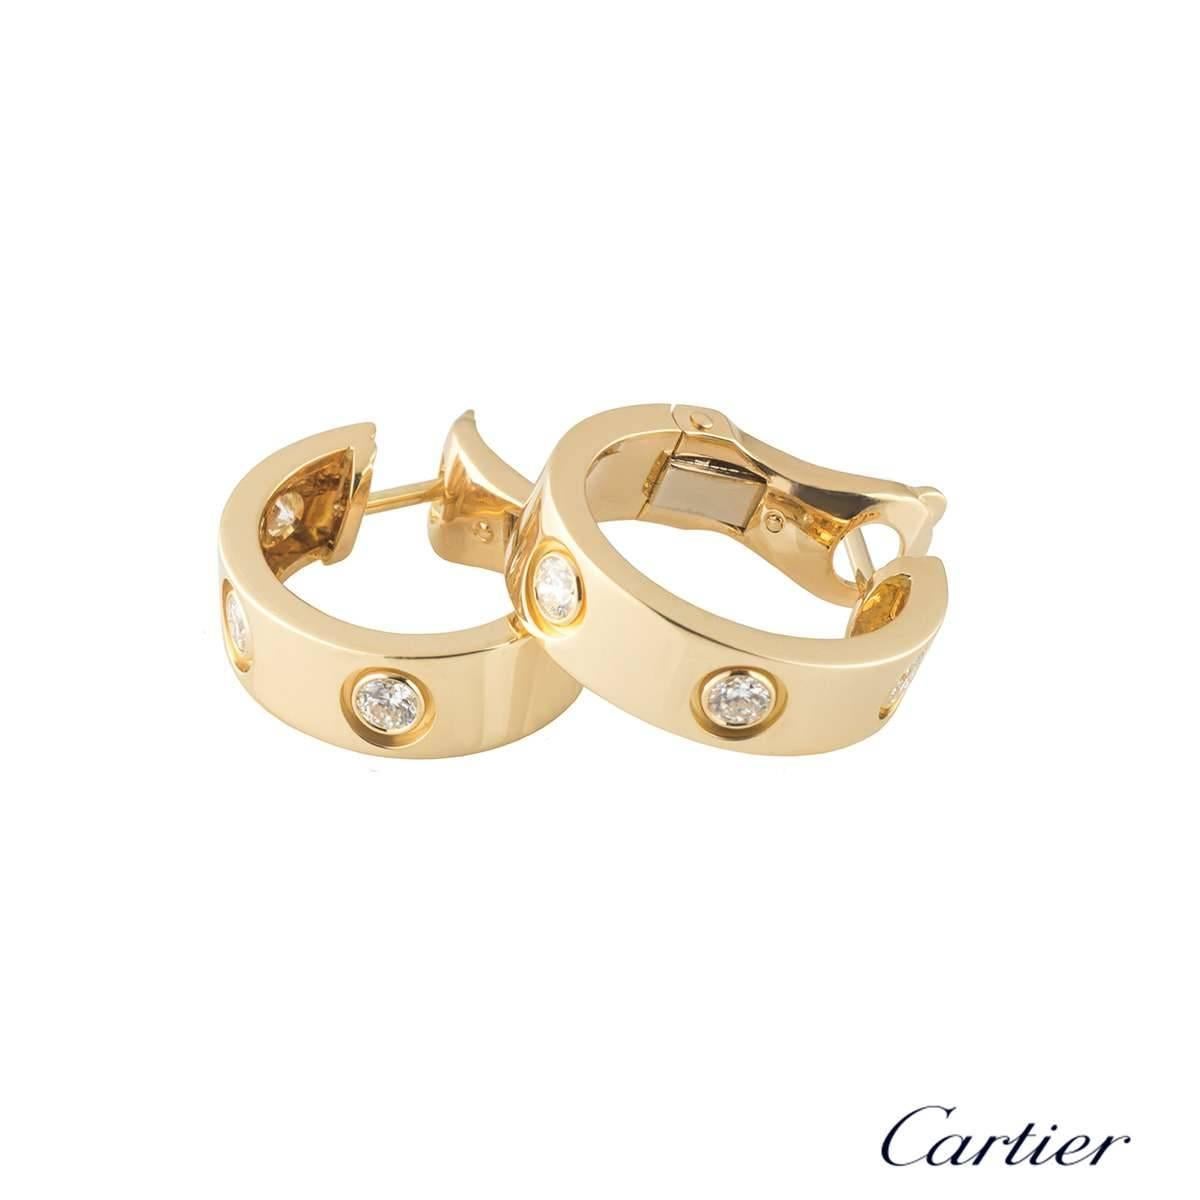 A pair of 18k yellow gold diamond earrings from the iconic Love collection by Cartier. Each hoop earring is set with 3 round brilliant cut diamonds. The earrings are 18mm in length and 5mm in width and feature a post and lever hinged fittings. The